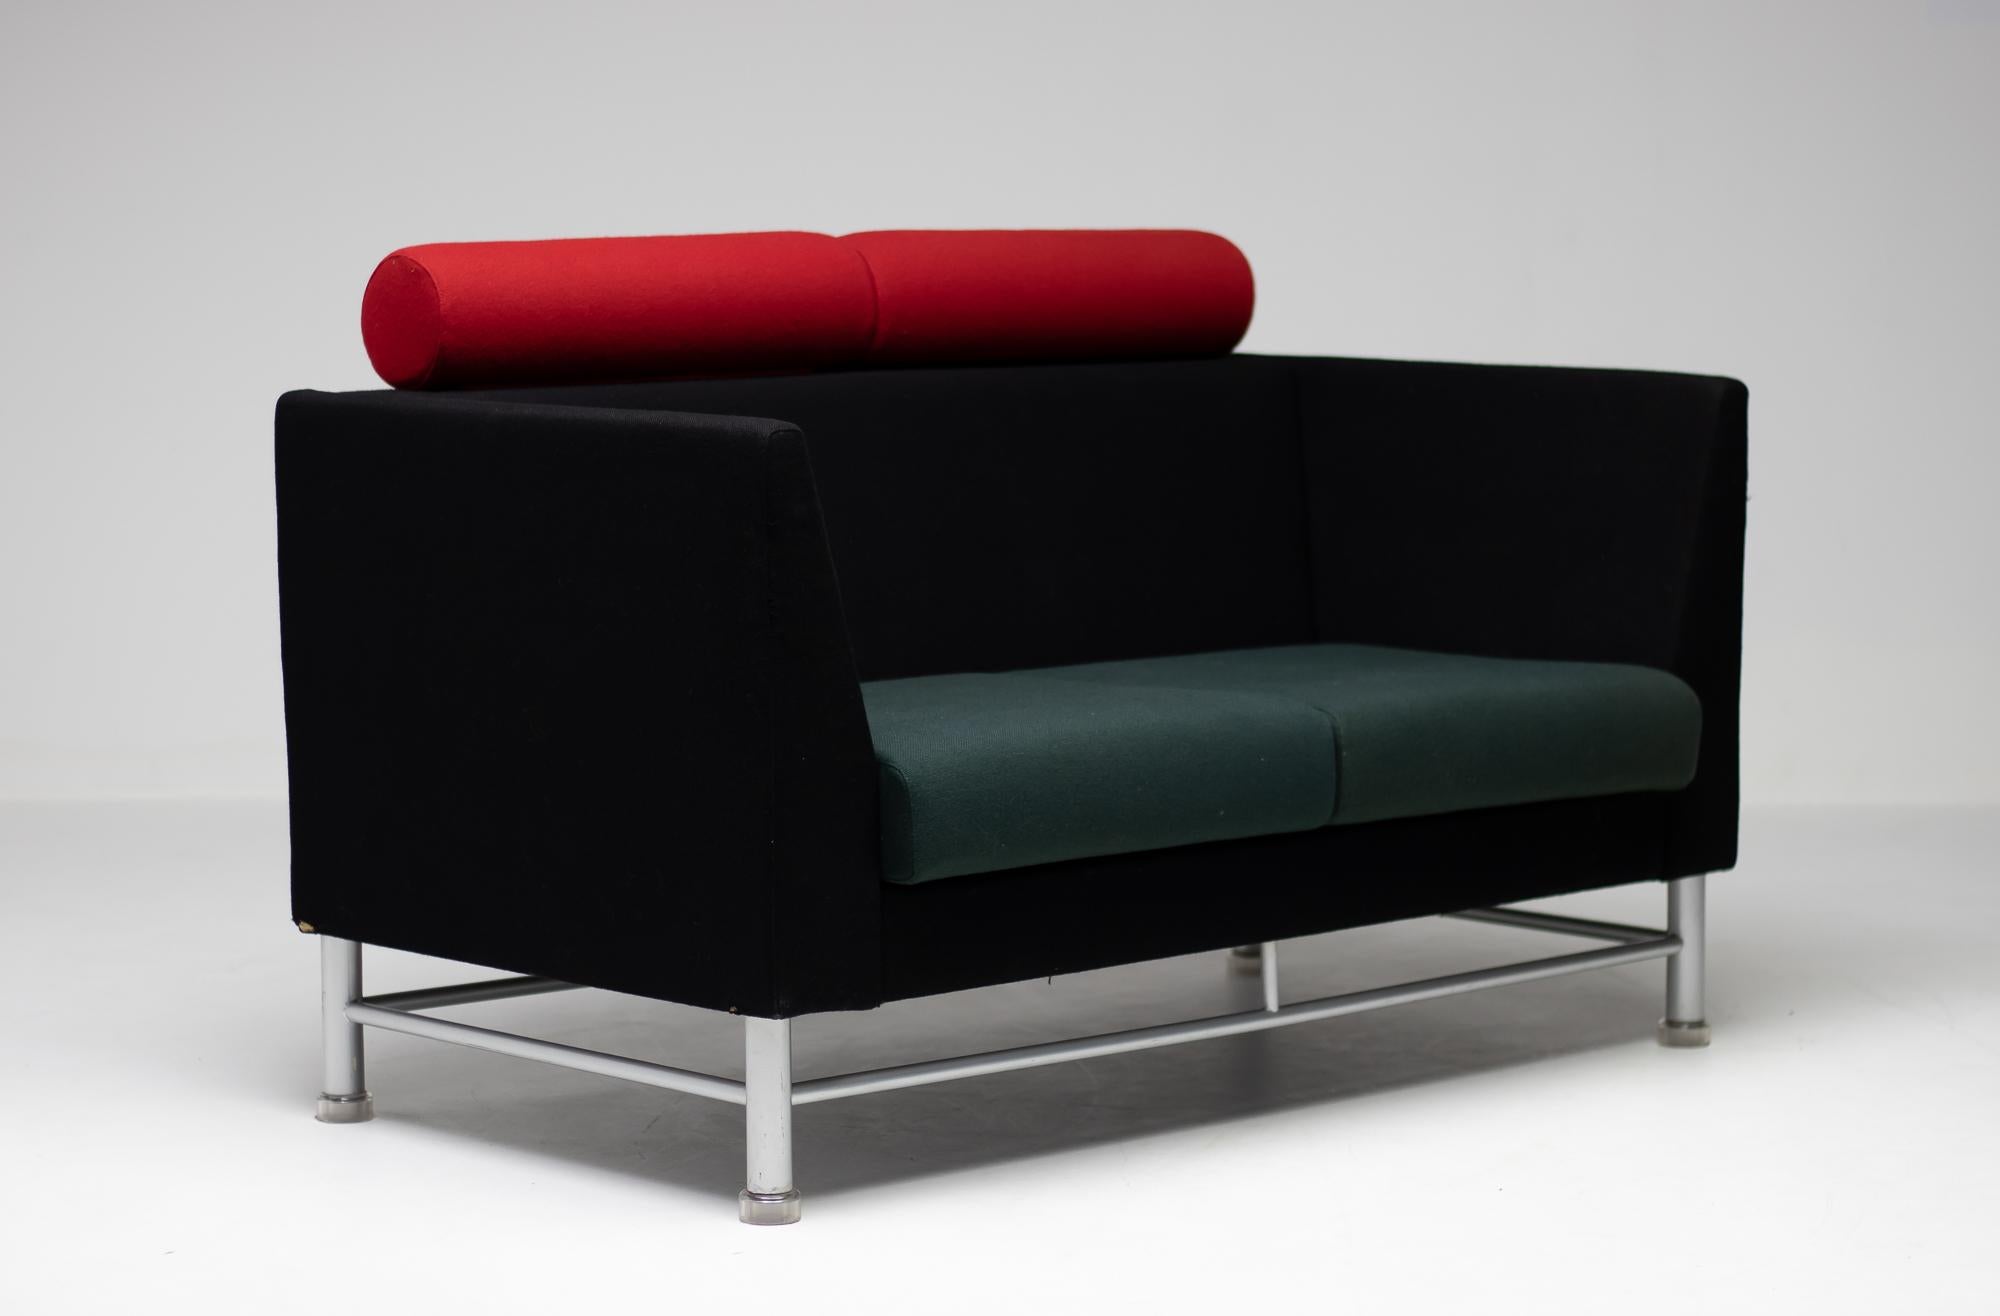 East side sofa designed by Ettore Sottsass for Knoll International in 1983. Postmodern sofa with its original upholstery in nice vintage condition. The sofa features a gray enameled steel base with translucent plastic feet.
The sofa will be shipped